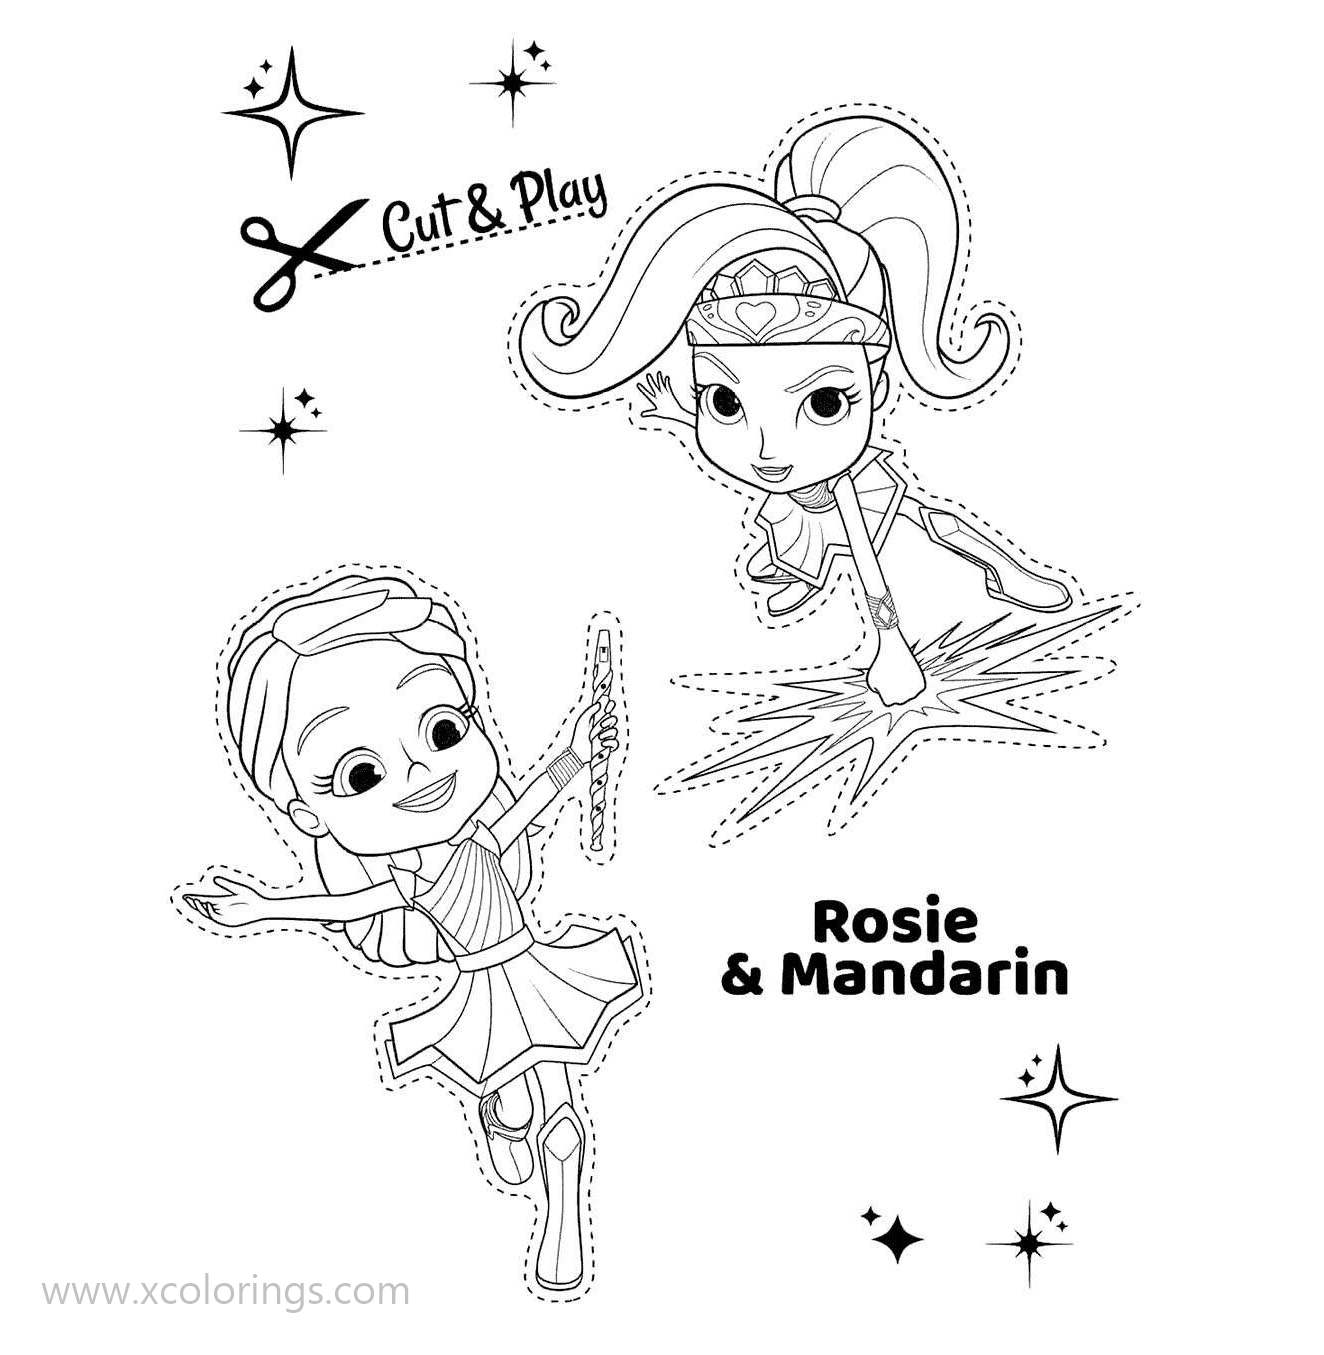 Free Rainbow Rangers Rosie and Mandarin Coloring Pages printable